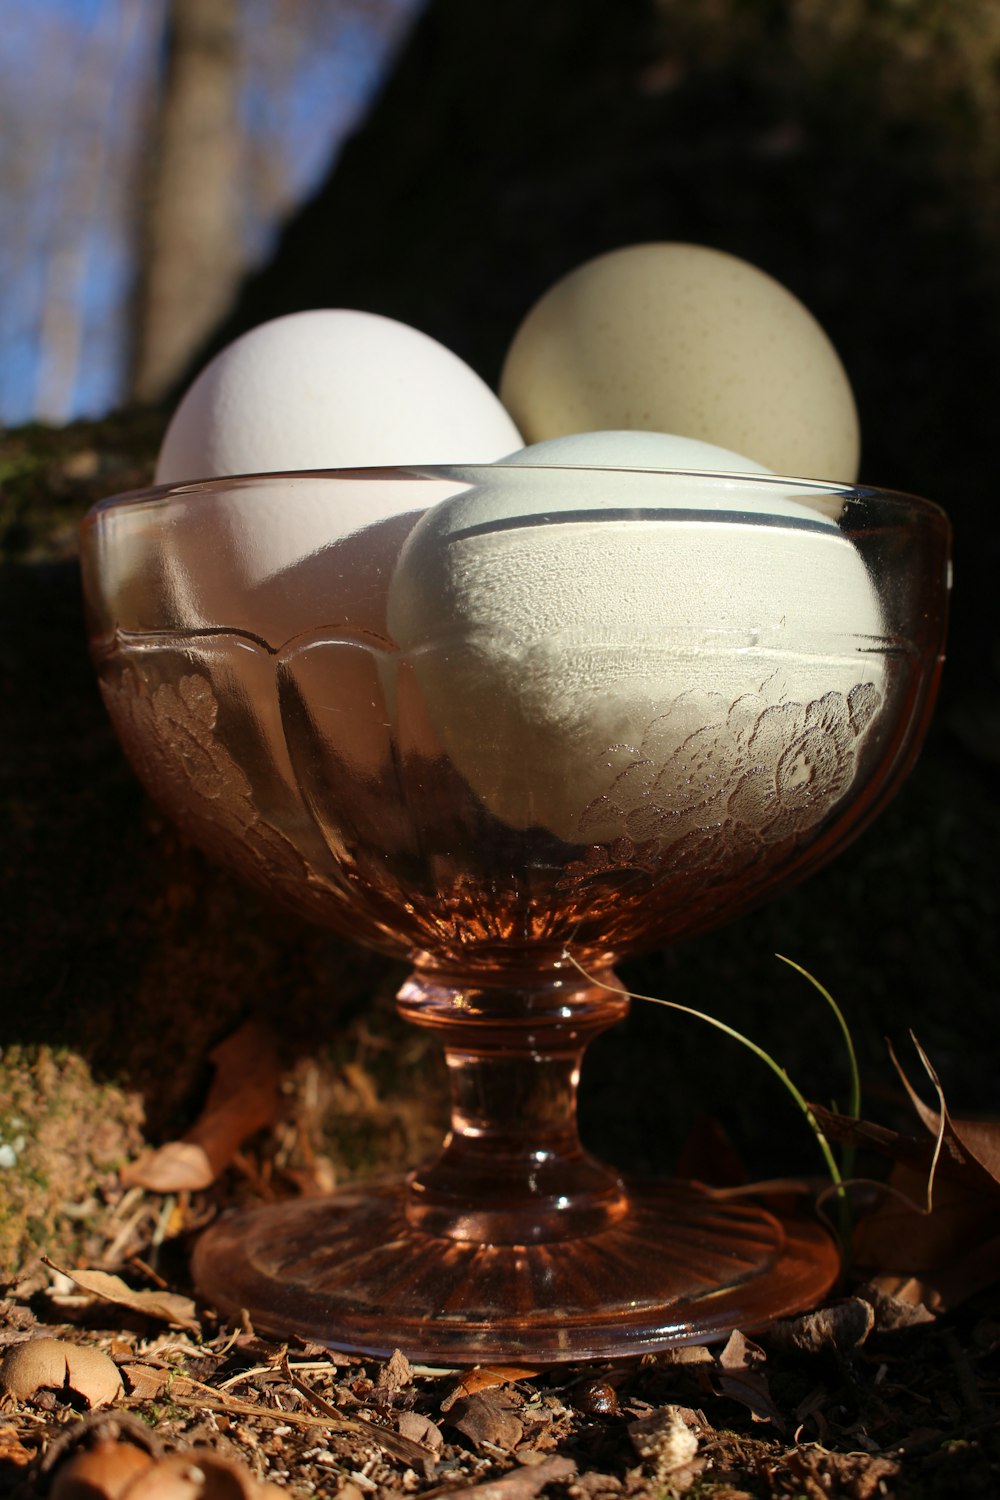 three eggs are in a glass bowl on the ground